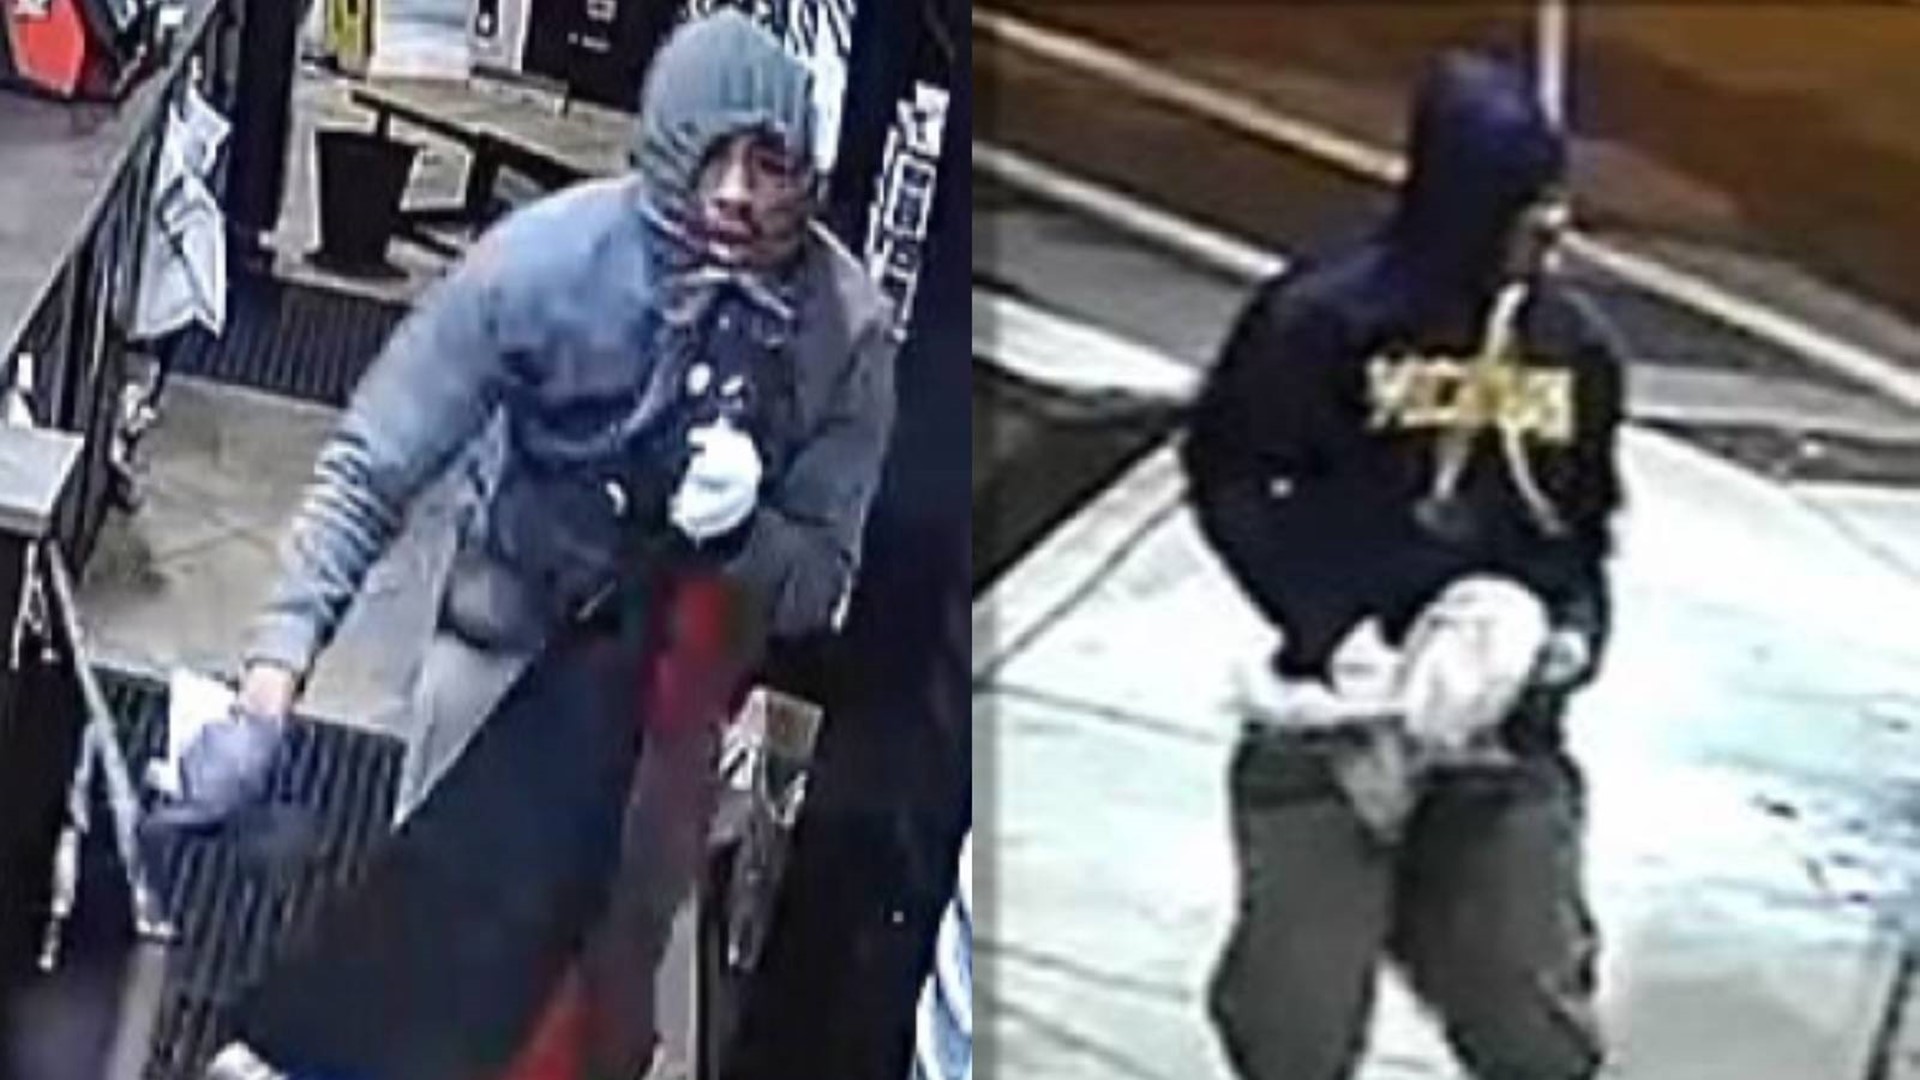 Police in Grand Rapids have released surveillance photos of two suspects who broke into Creston Market earlier this week.